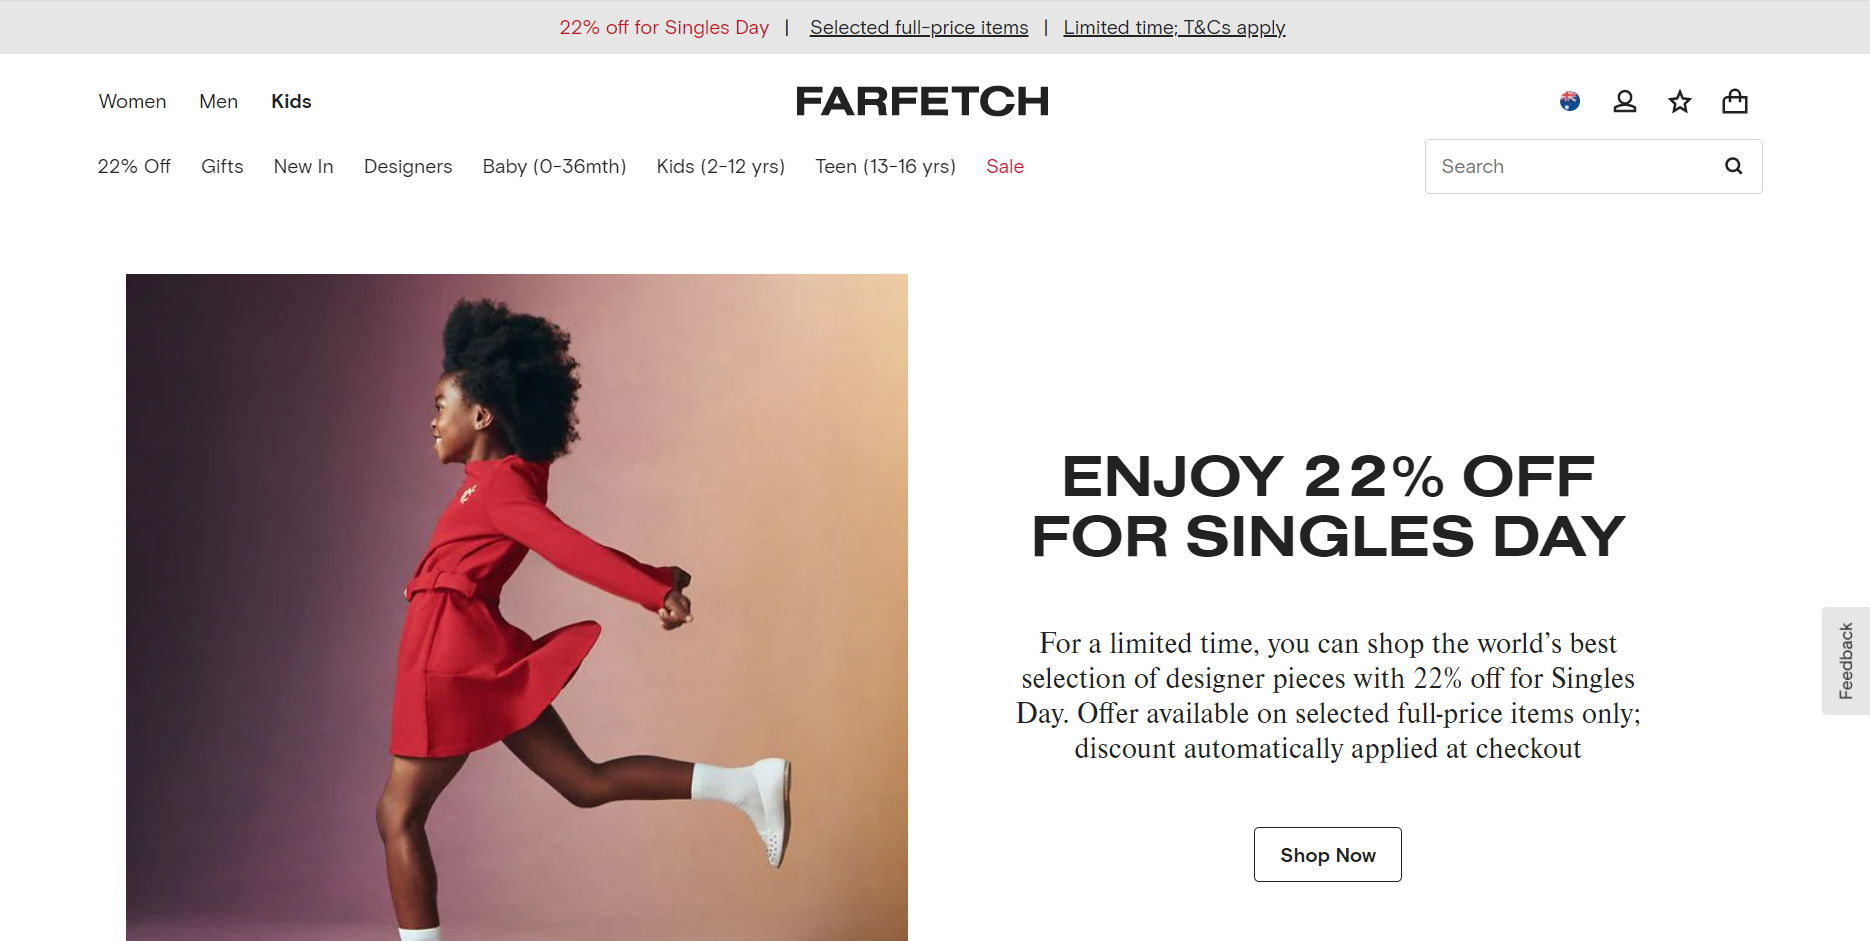 Shh, 22% OFF full-price items singles day offer + get extra AUD 70 OFF AUD 940+ with secret coupon